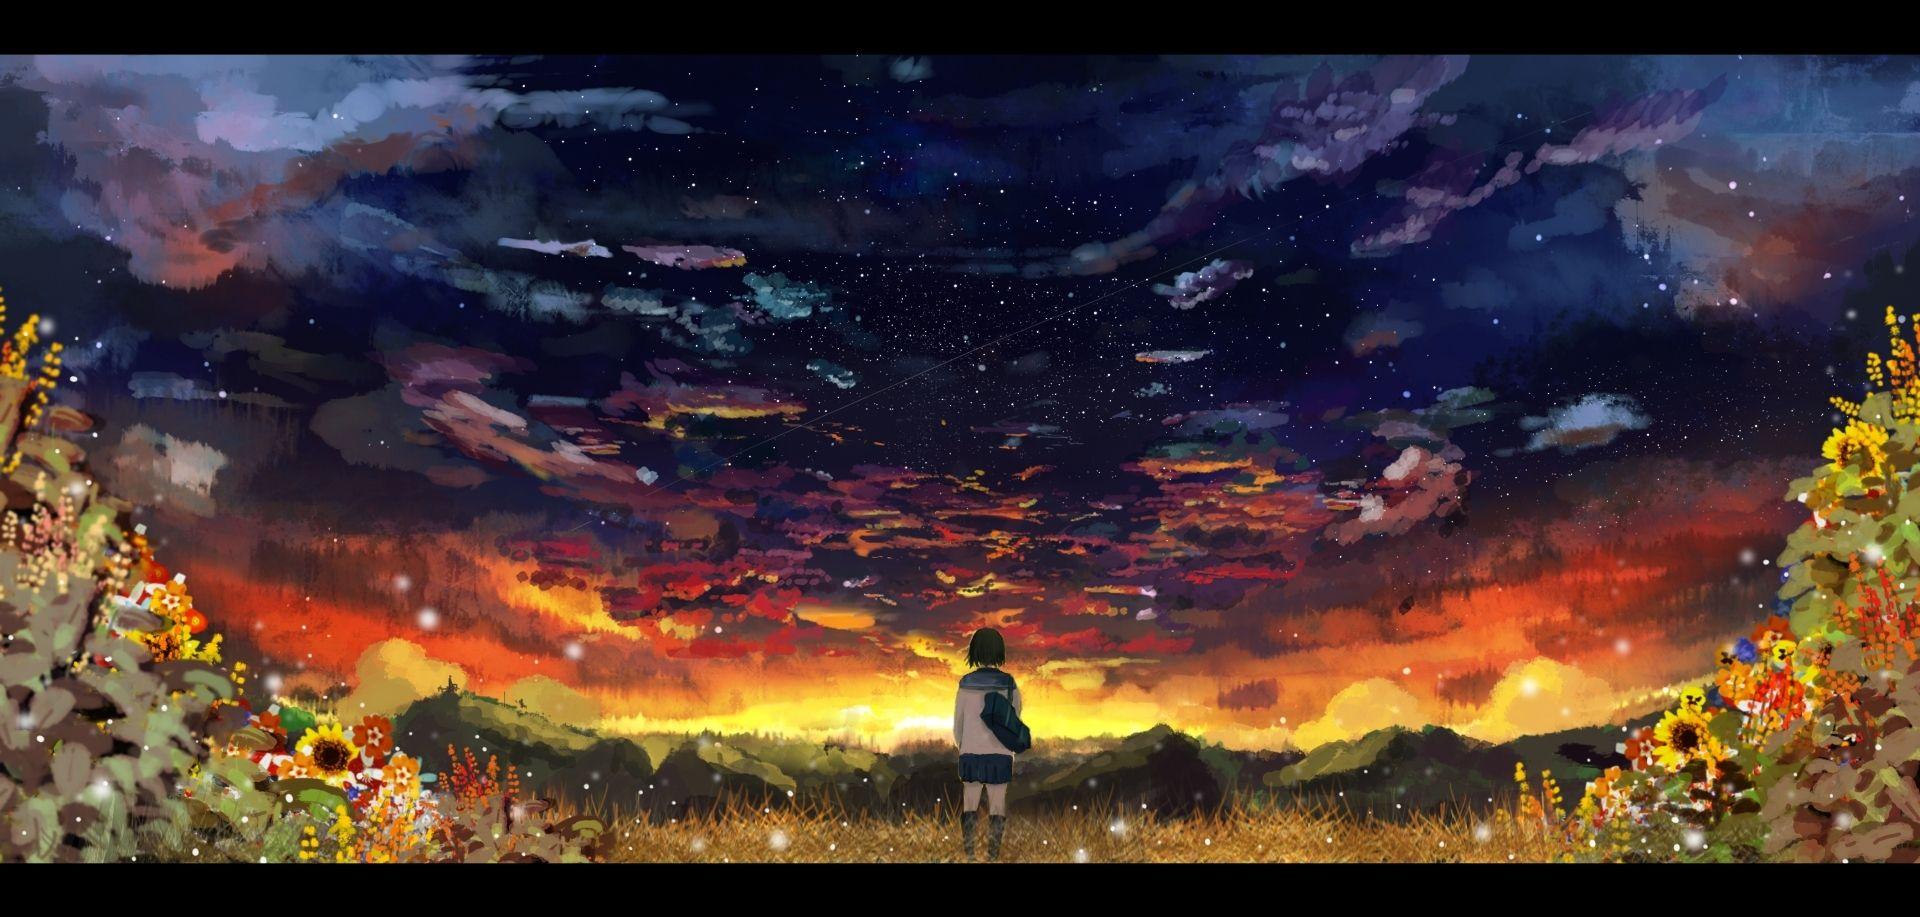 Anime Sunset Wallpapers Top Free Anime Sunset Backgrounds